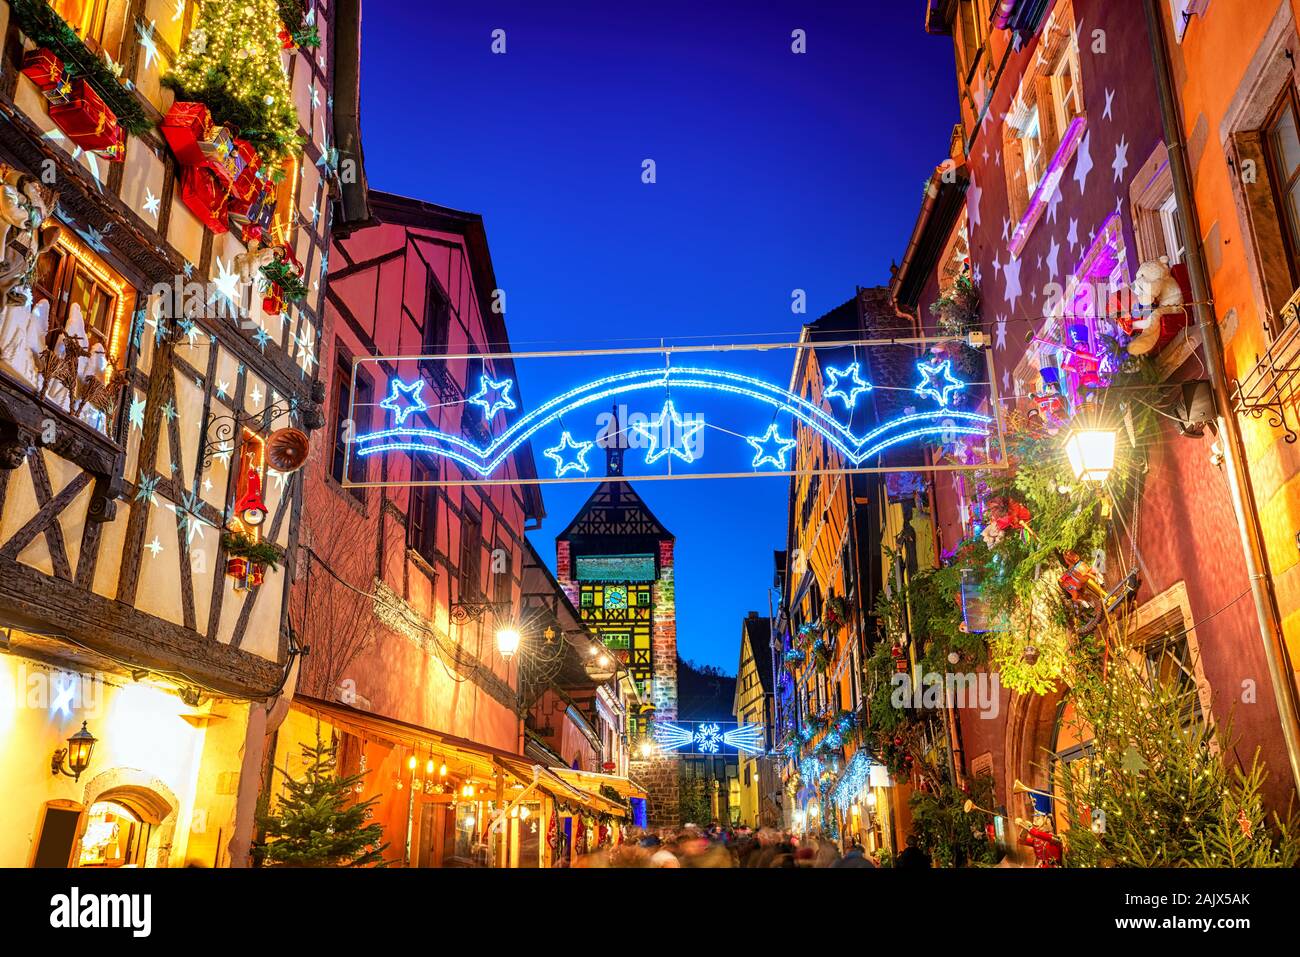 Festive Christmas illumination in the historical Old town of Riquewihr, Alsace, France Stock Photo